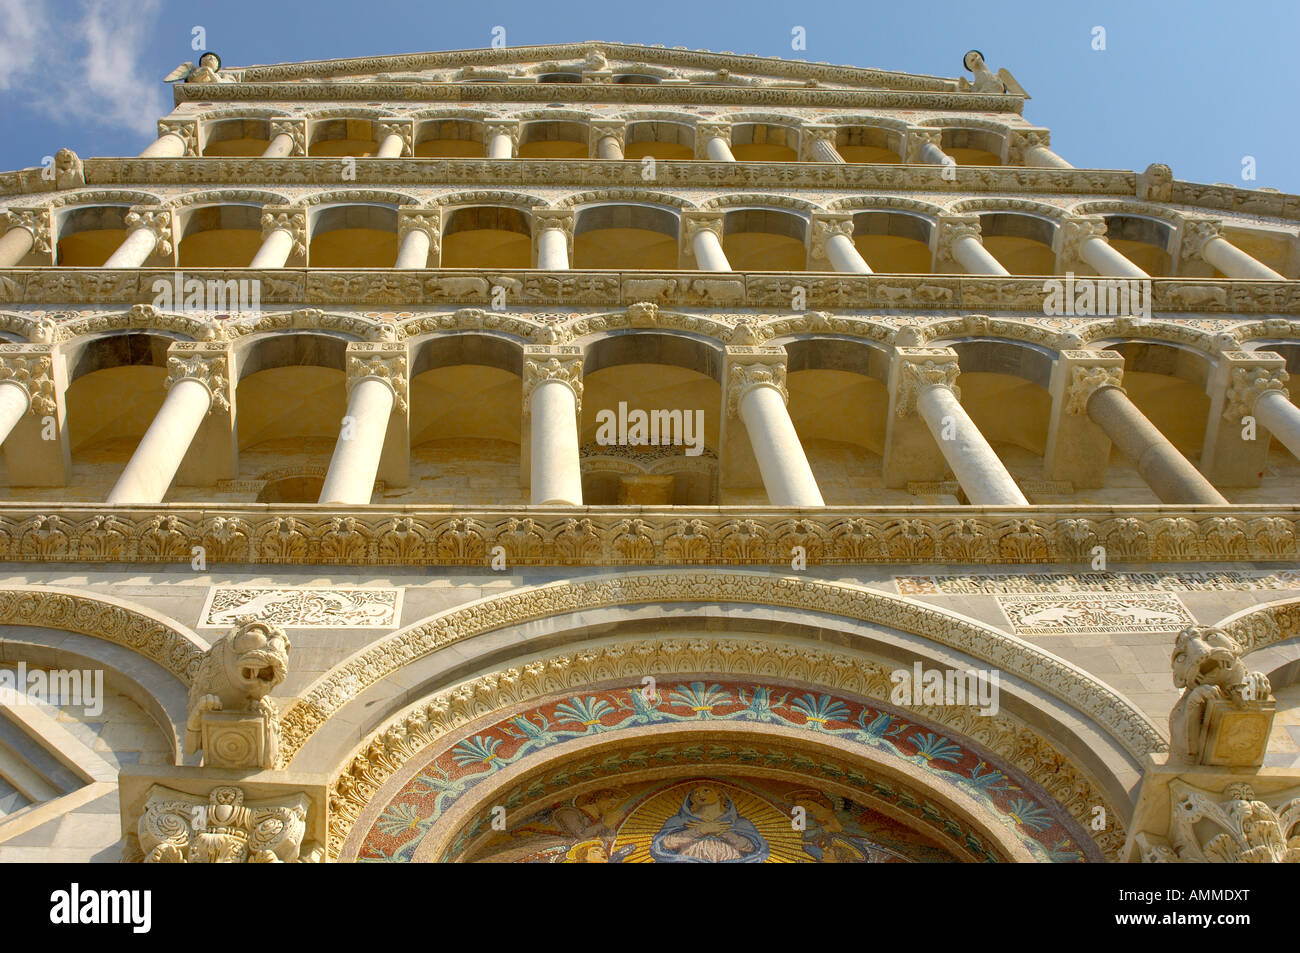 View of the Duomo of Pisa romanesque arcades on the cathedral facade. Piazza del Miracoli Pisa Italy Stock Photo